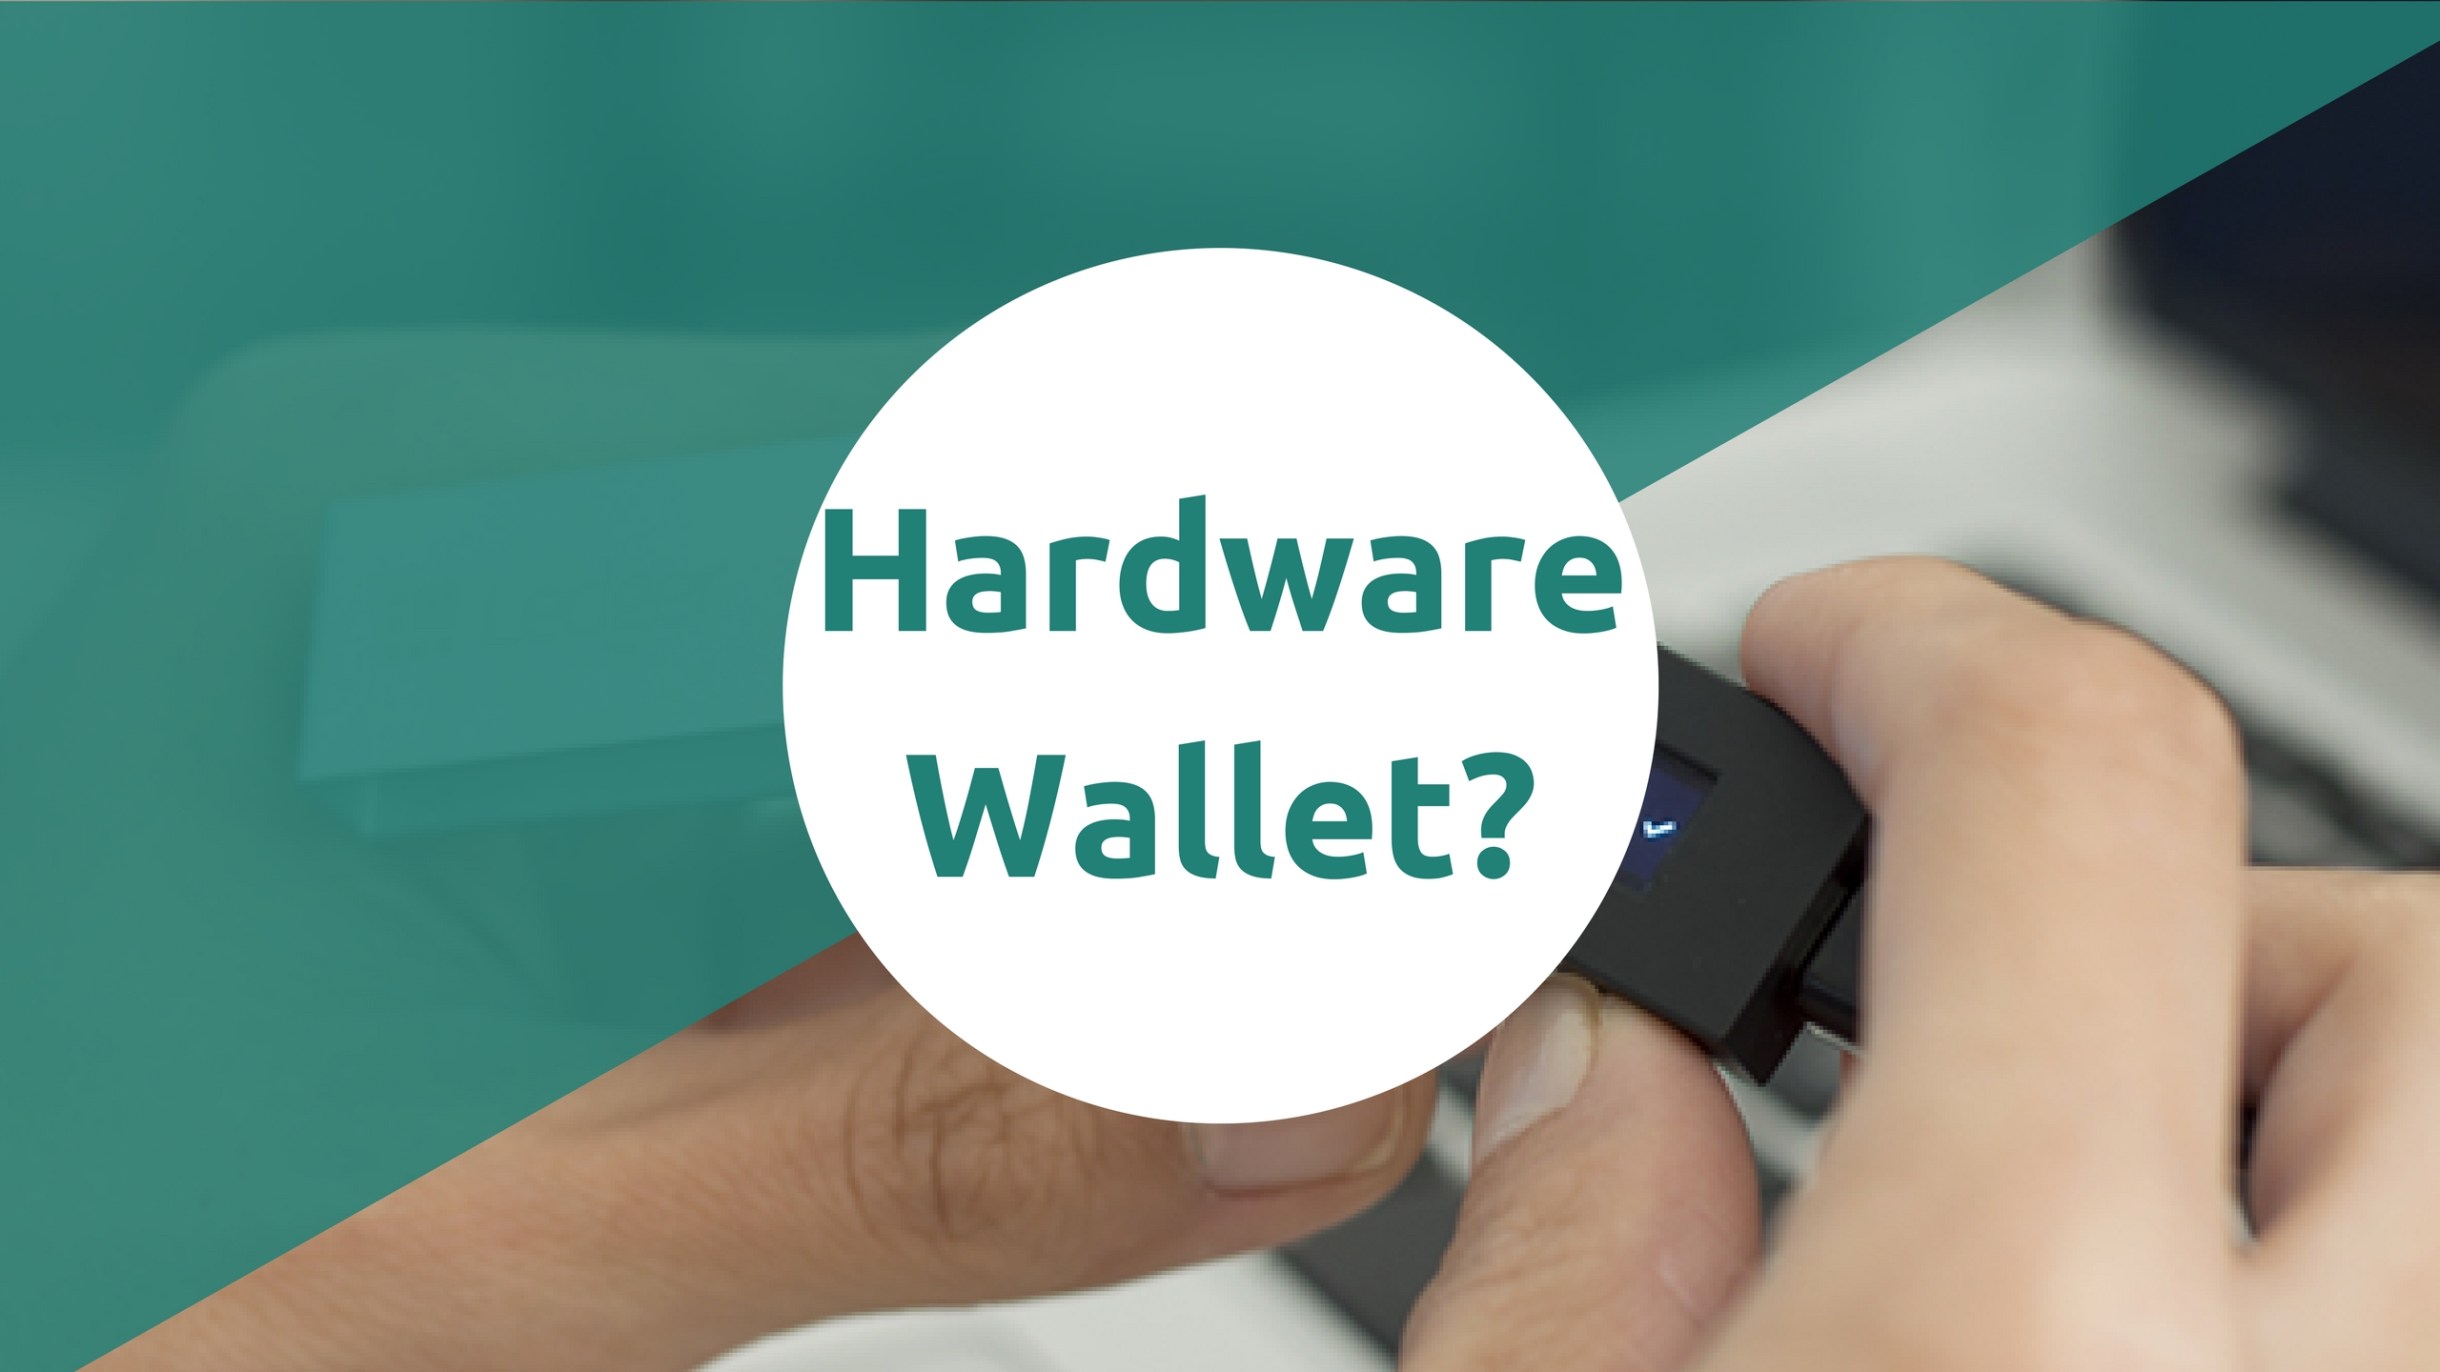 SATOSHILABS, TOGETHER WITH A PARTNER, RELEASED “LUX” CLASS HARDWARE WALLETS